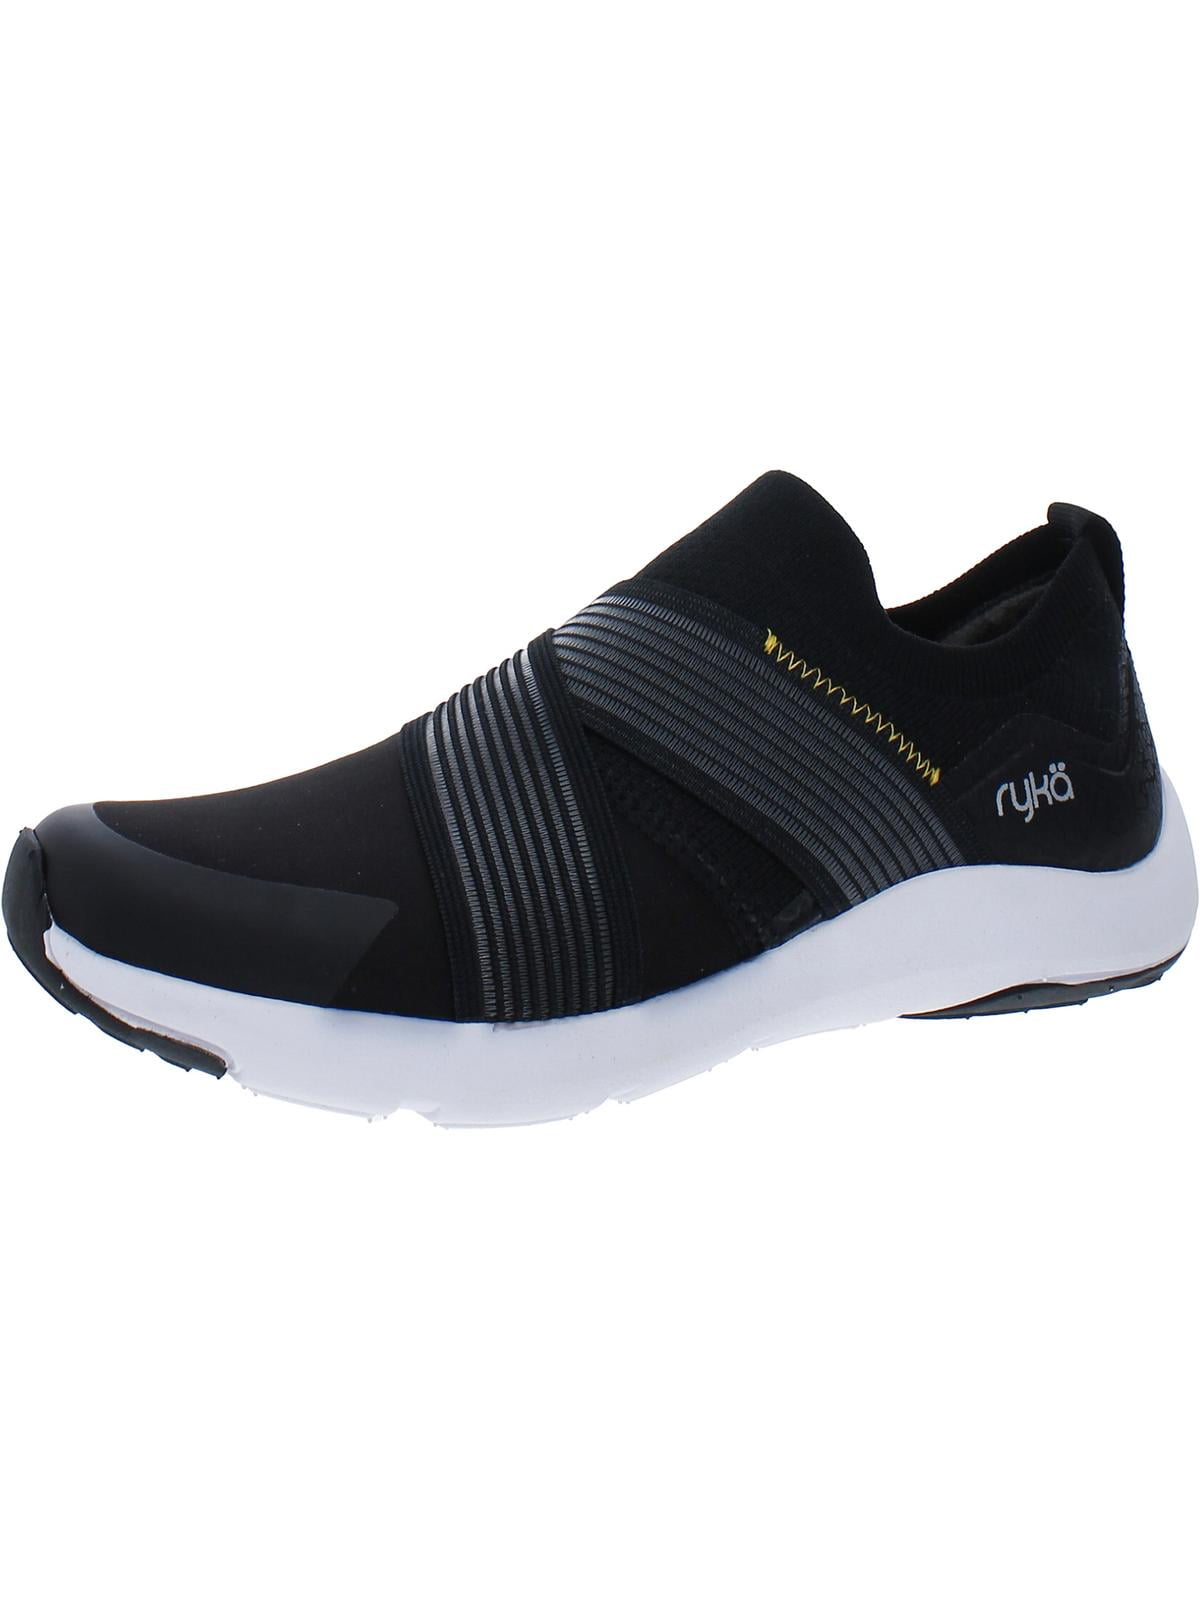 Ryka Womens Empower Fitness Slip On Athletic and Training Shoes ...